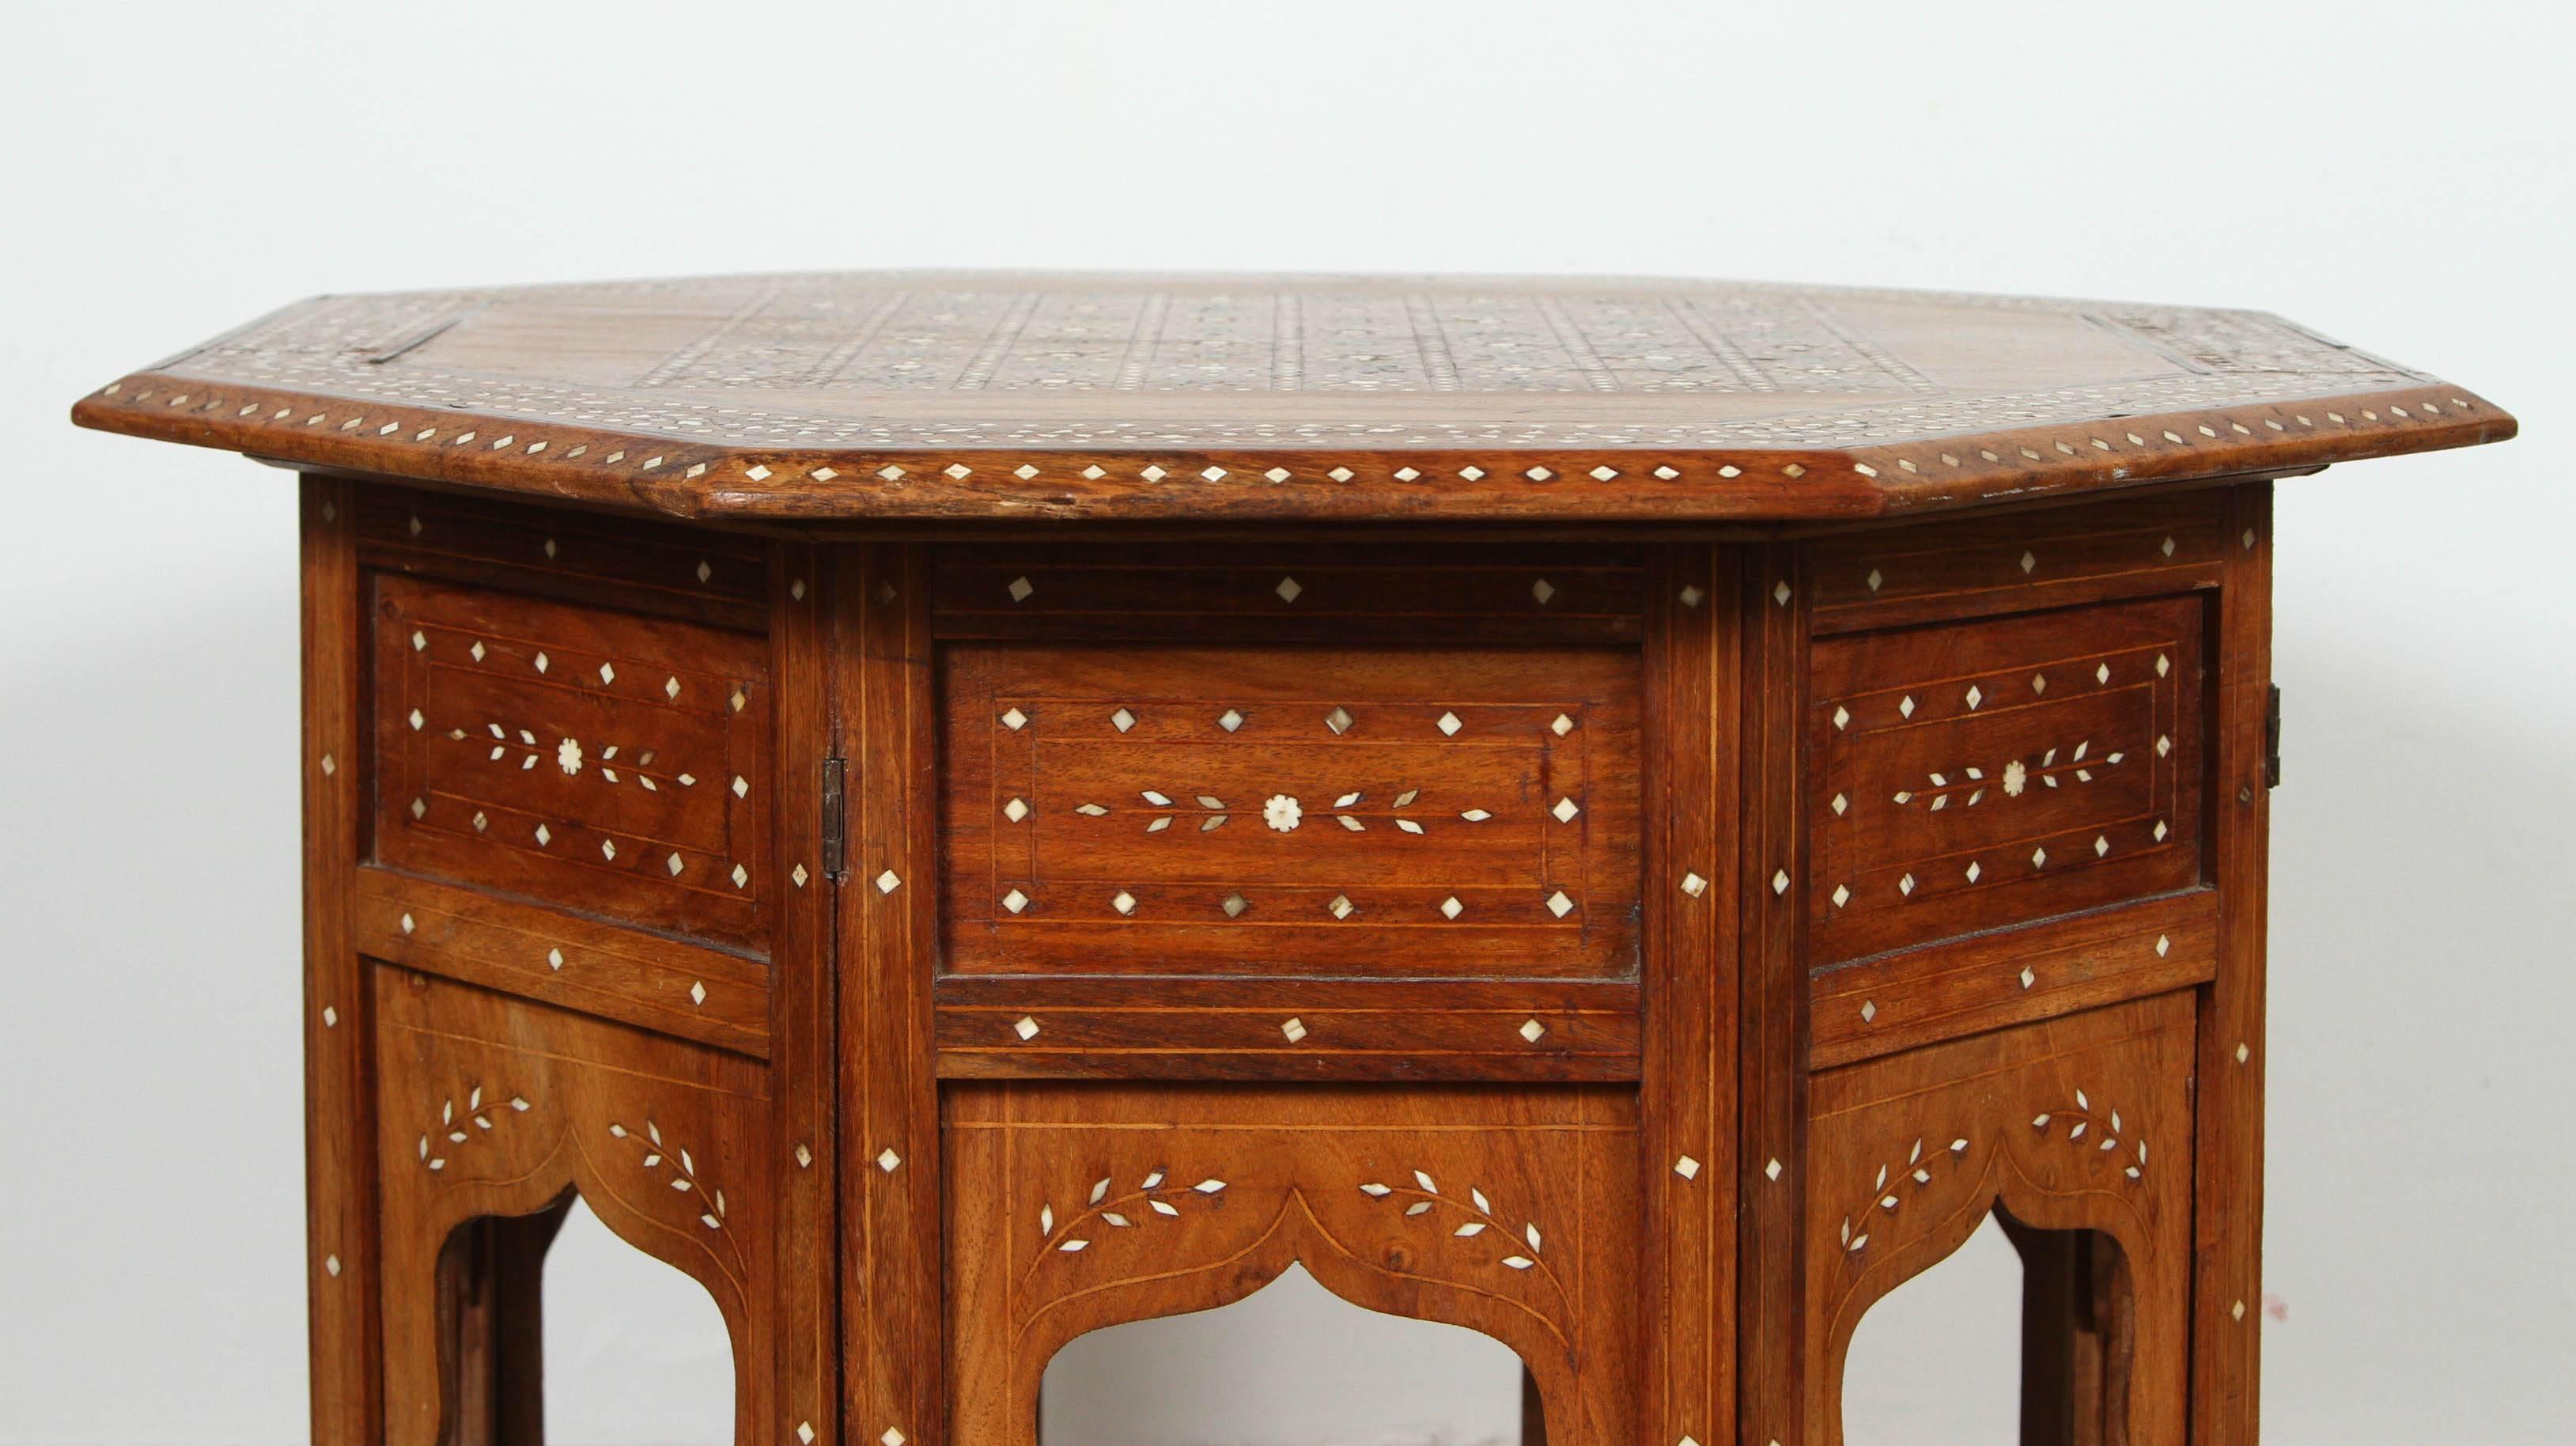 Anglo-Indian Octagonal Game Chest Table 1